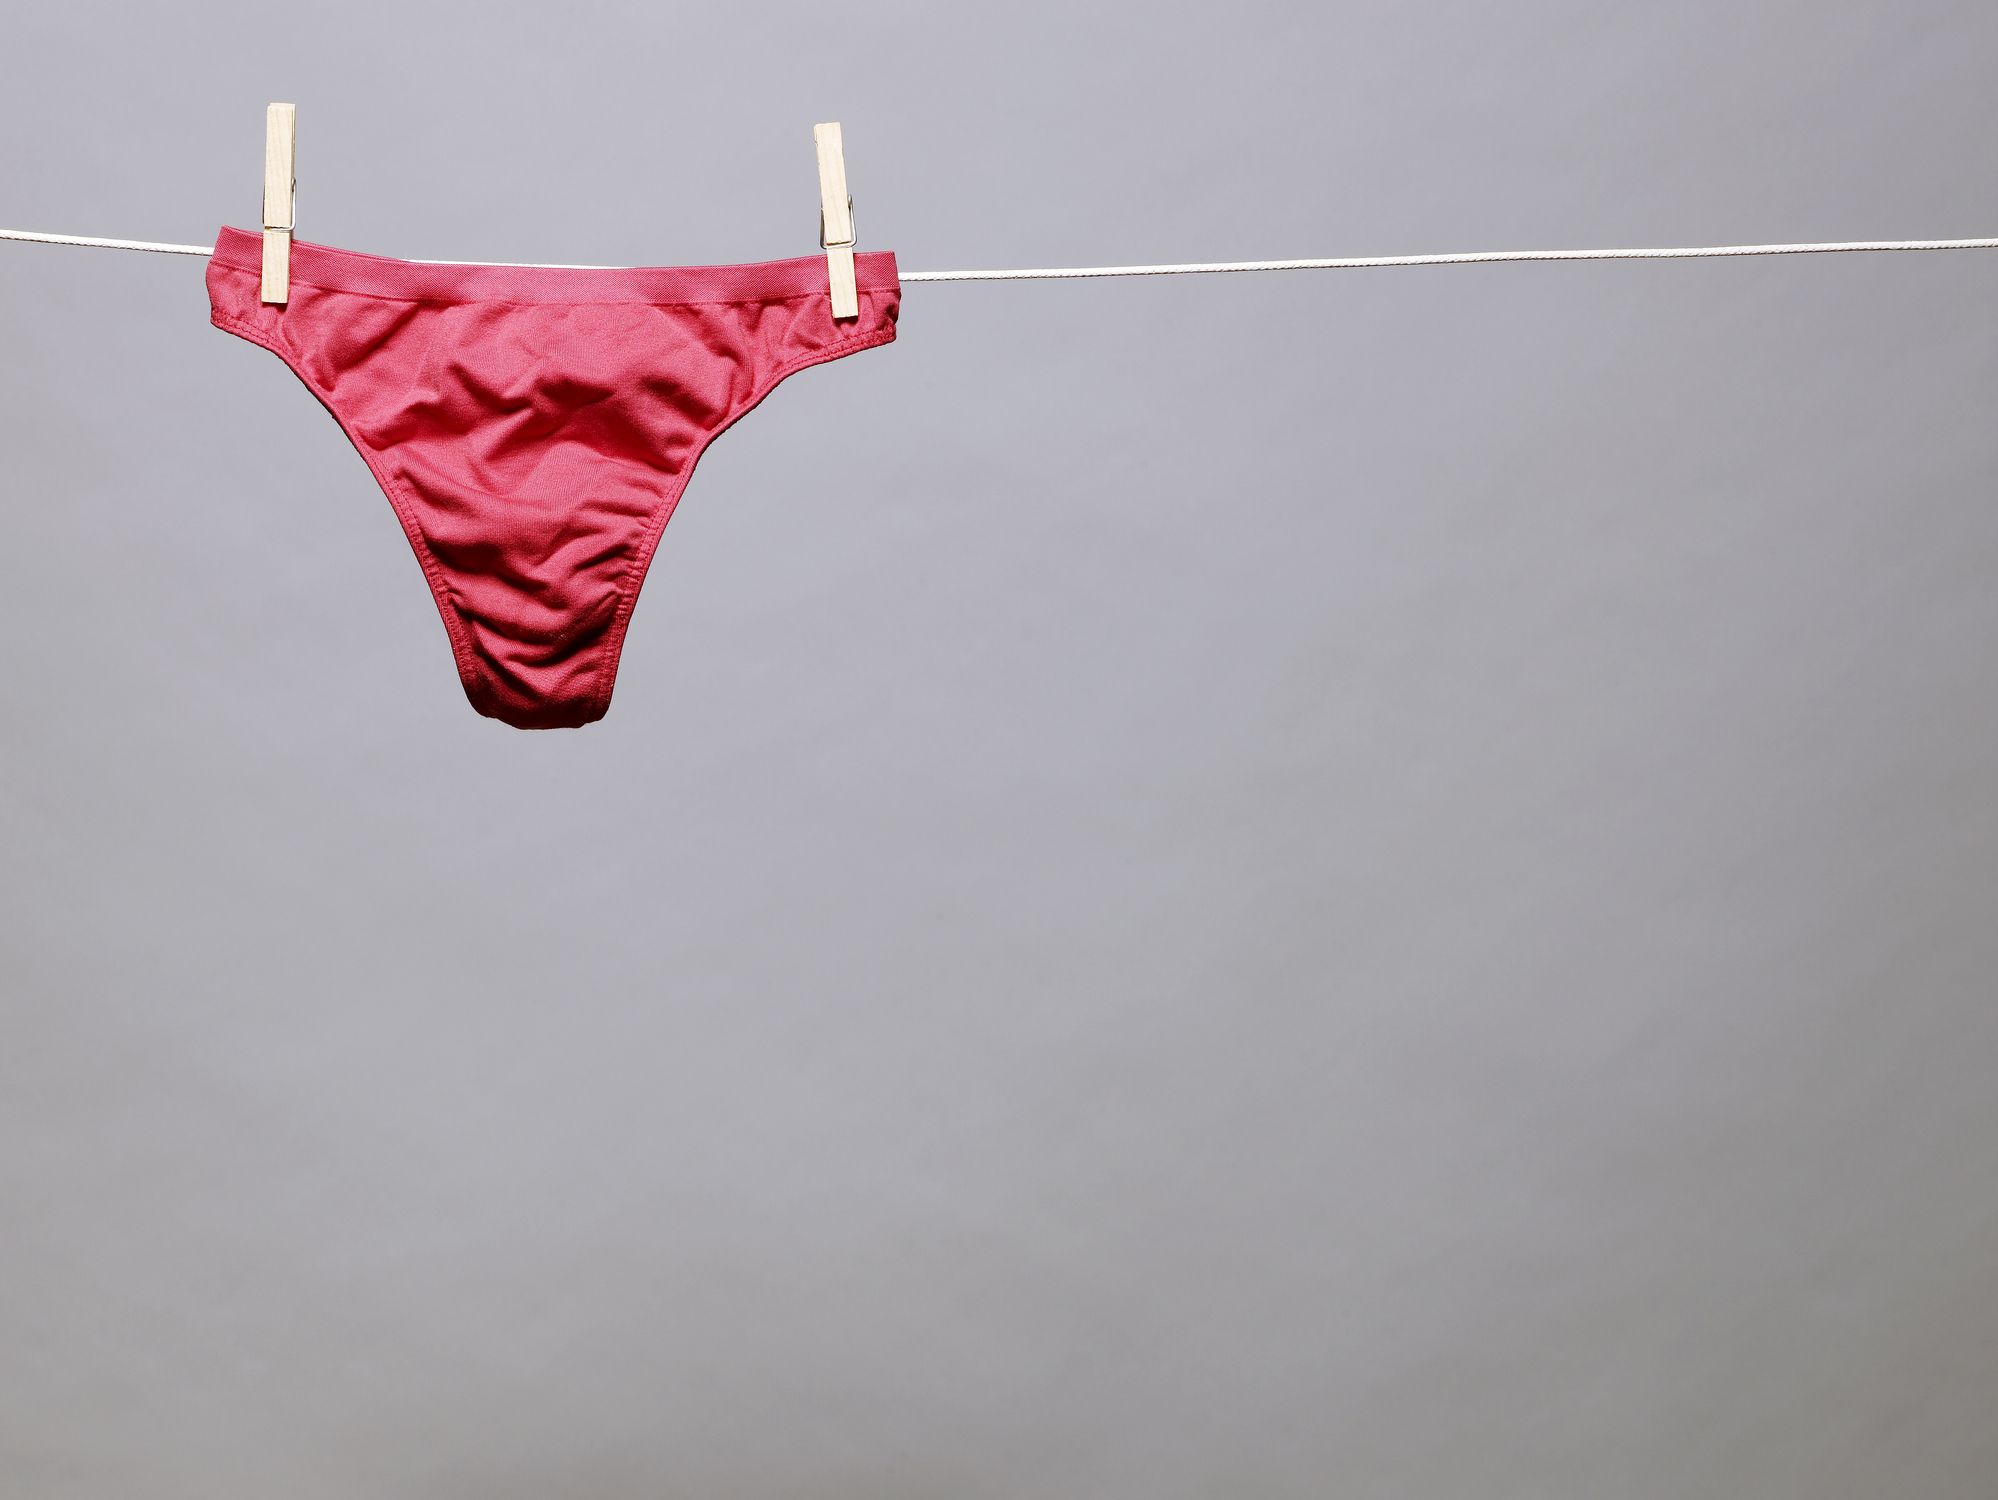 Why Do I Have A Sweaty Vagina? Causes, Treatments, And Prevention